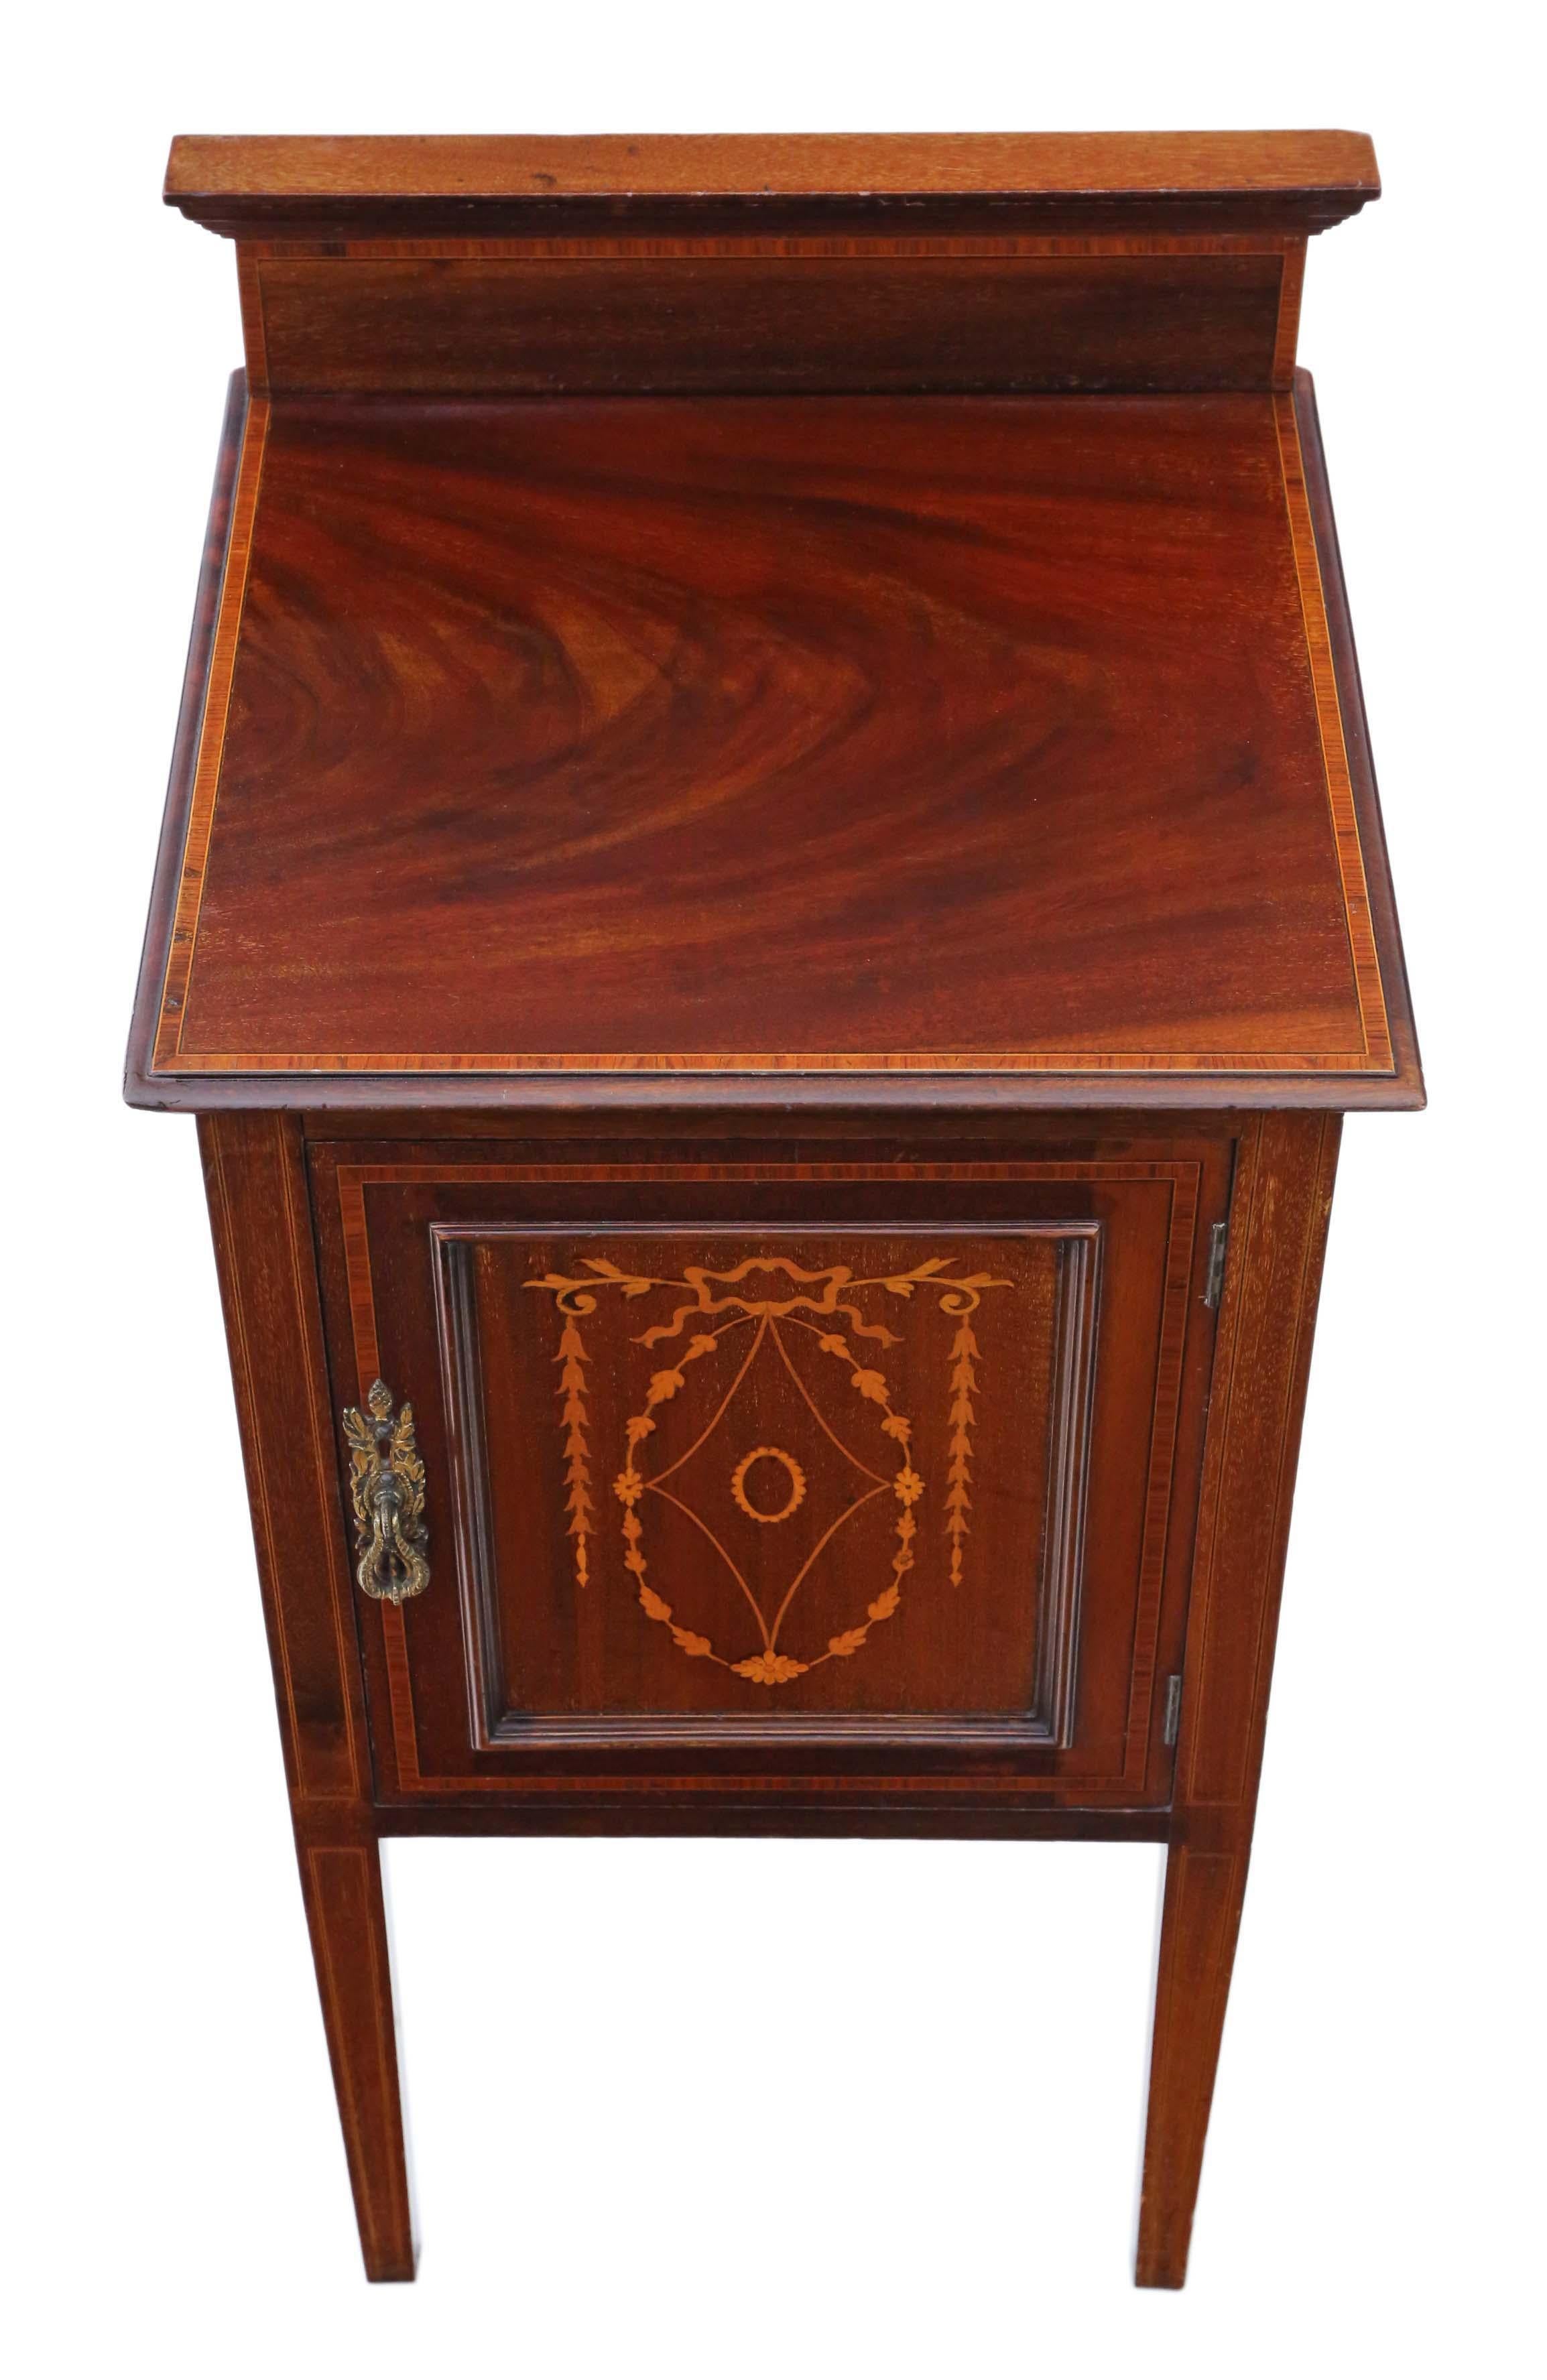 Antique quality Edwardian C1910 inlaid mahogany bedside table or cupboard.

No loose joints and no woodworm. Full of age, character and charm.

Would look great in the right location!

Overall maximum dimensions: 42cm W x 41cm D x 75cm H (plus